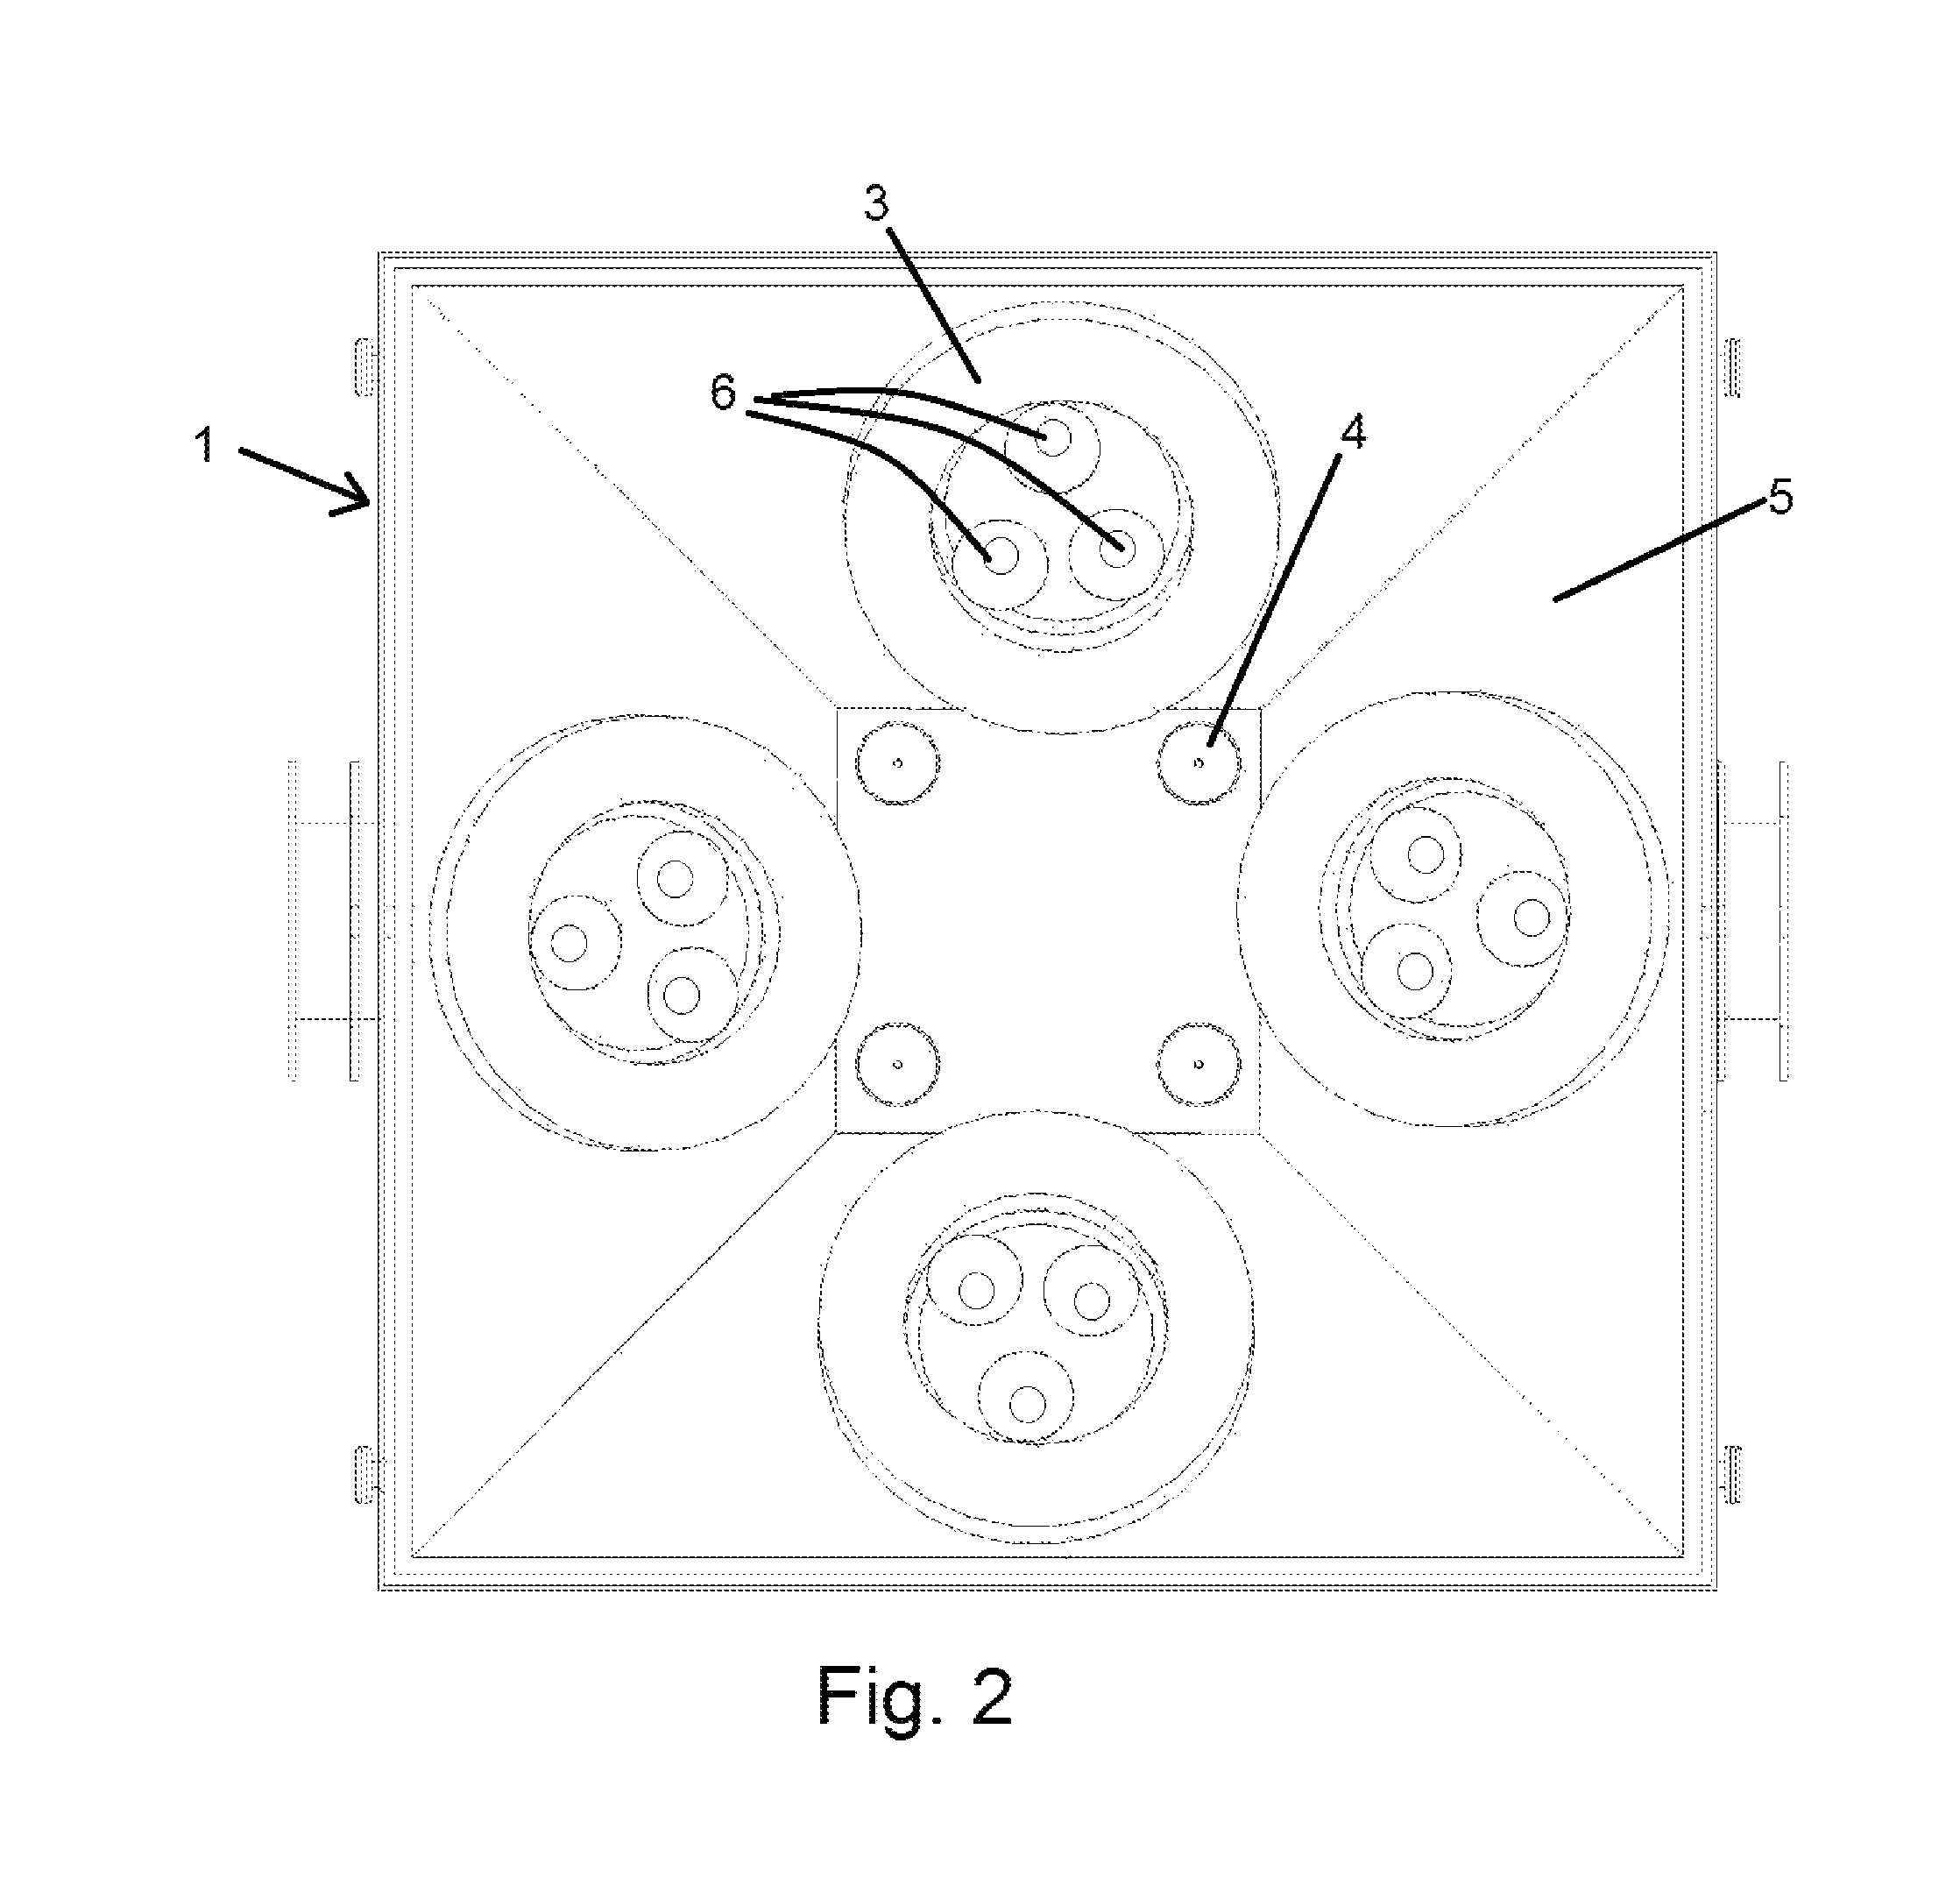 Portable apparatus and method for producing a simulated flame effect